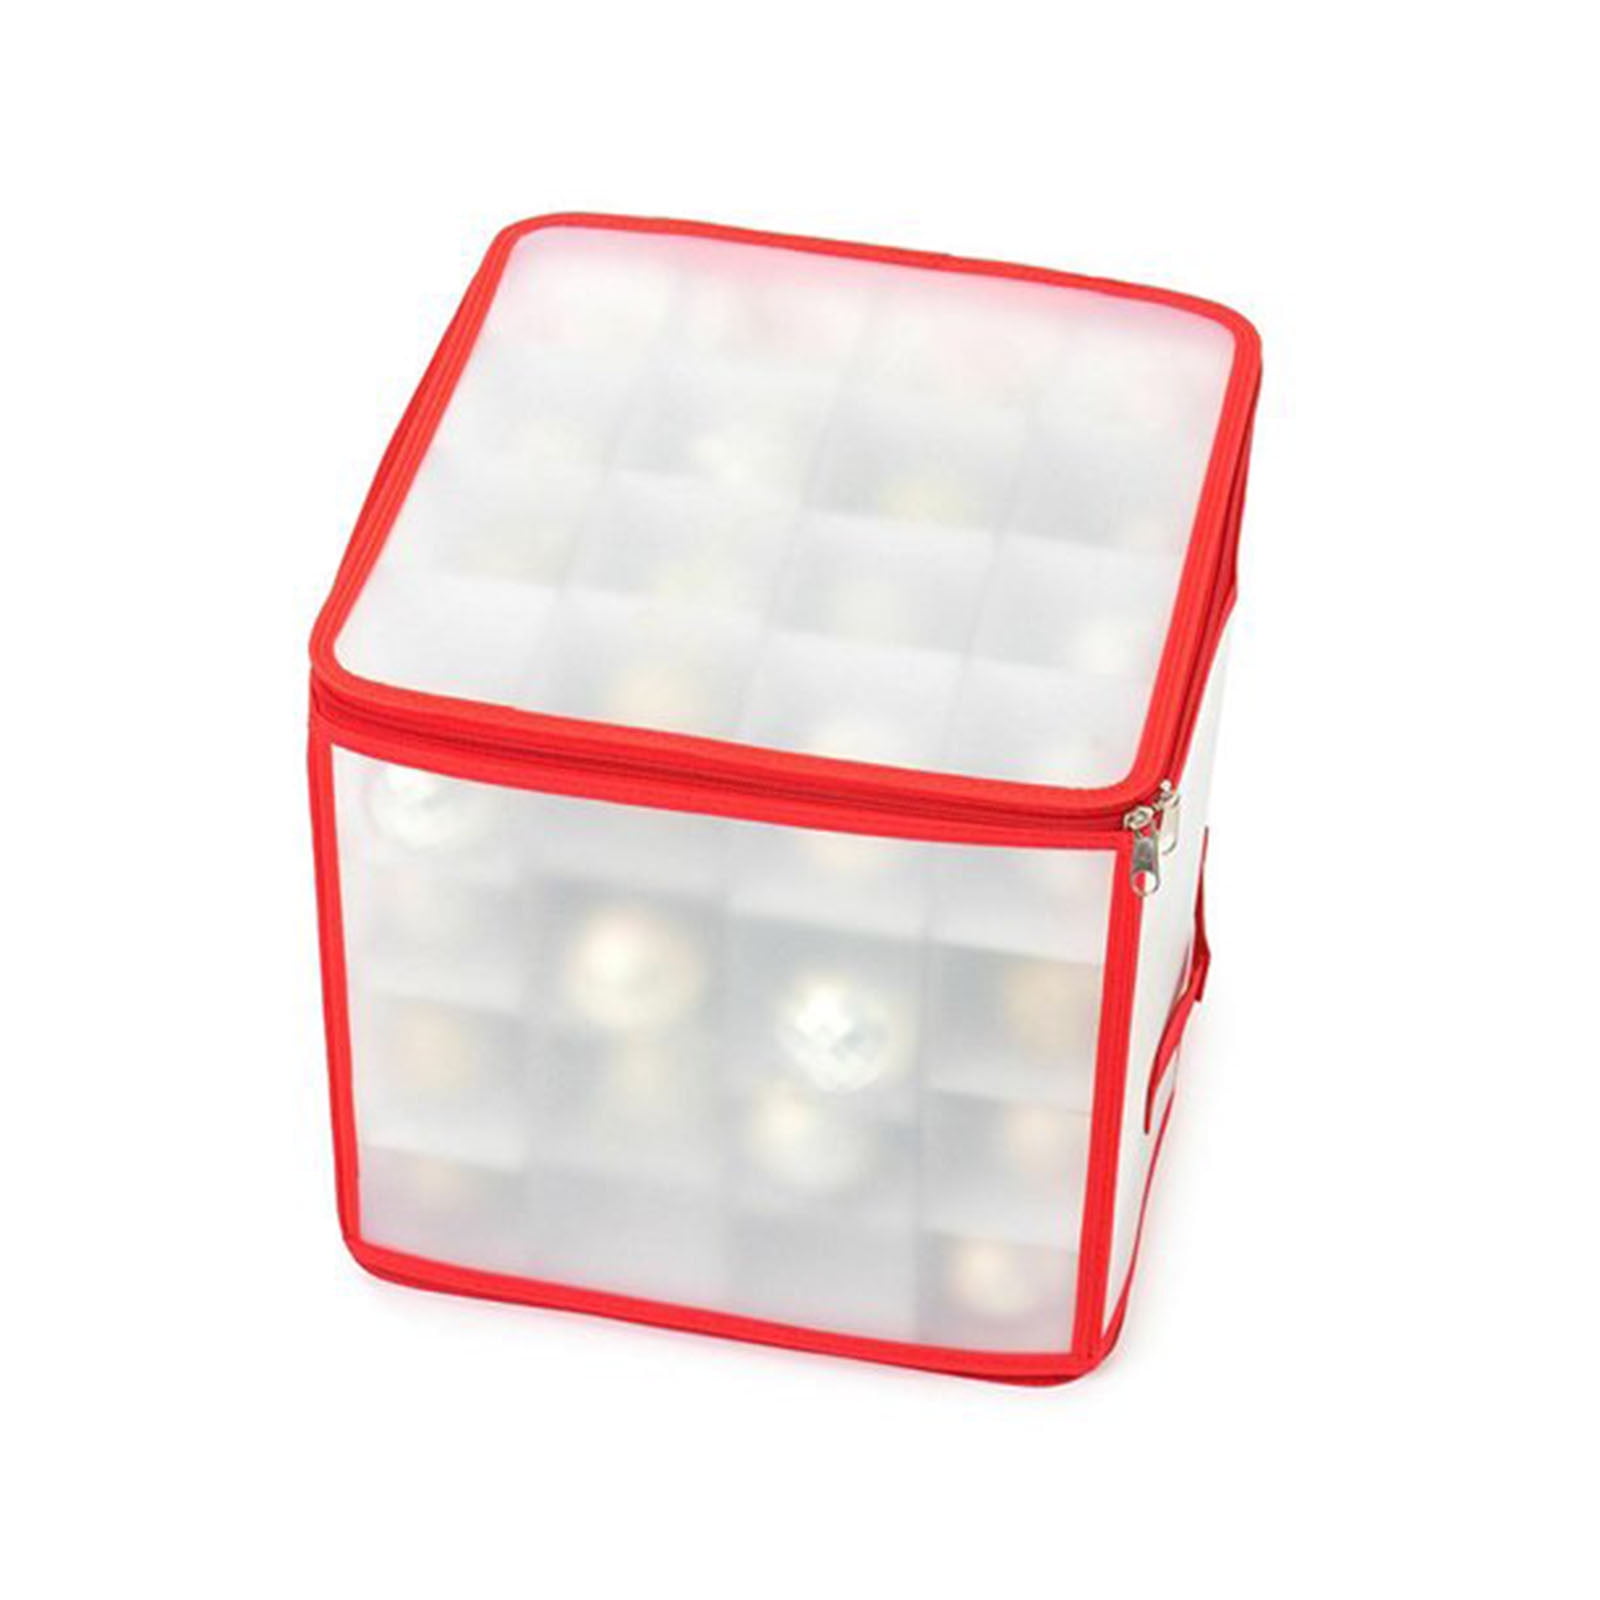  Plastic Christmas Ornament Storage Box with Zippered Closure  [1Pack], Hold 64 Christmas Balls Holiday Ornaments Holiday Ornament Storage  Cube Organizer Christmas Chest with Dividers, Xmas Holiday : Home & Kitchen